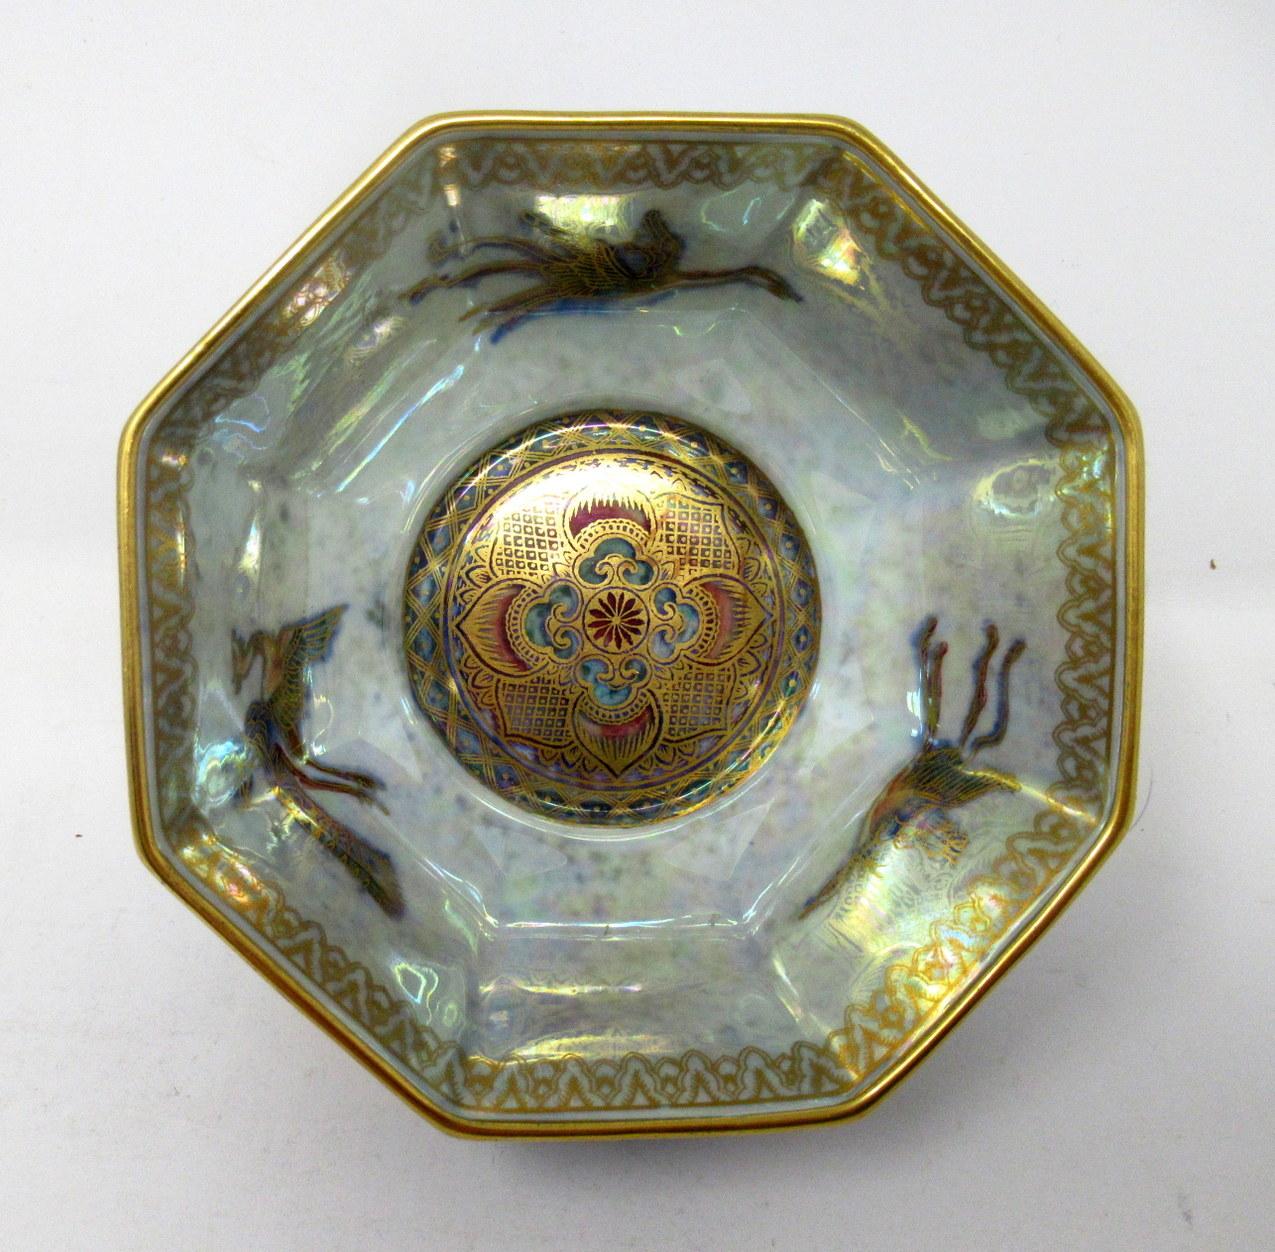 A very elegant Art Deco “Celestial Dragon” pattern Lustre SINGLE BOWL of compact proportions and octagonal form by Daisy Makeig-Jones, circa 1920-1930.

This finely made ceramic bowl is a derivative of her renowned “Fairyland Luster” series which